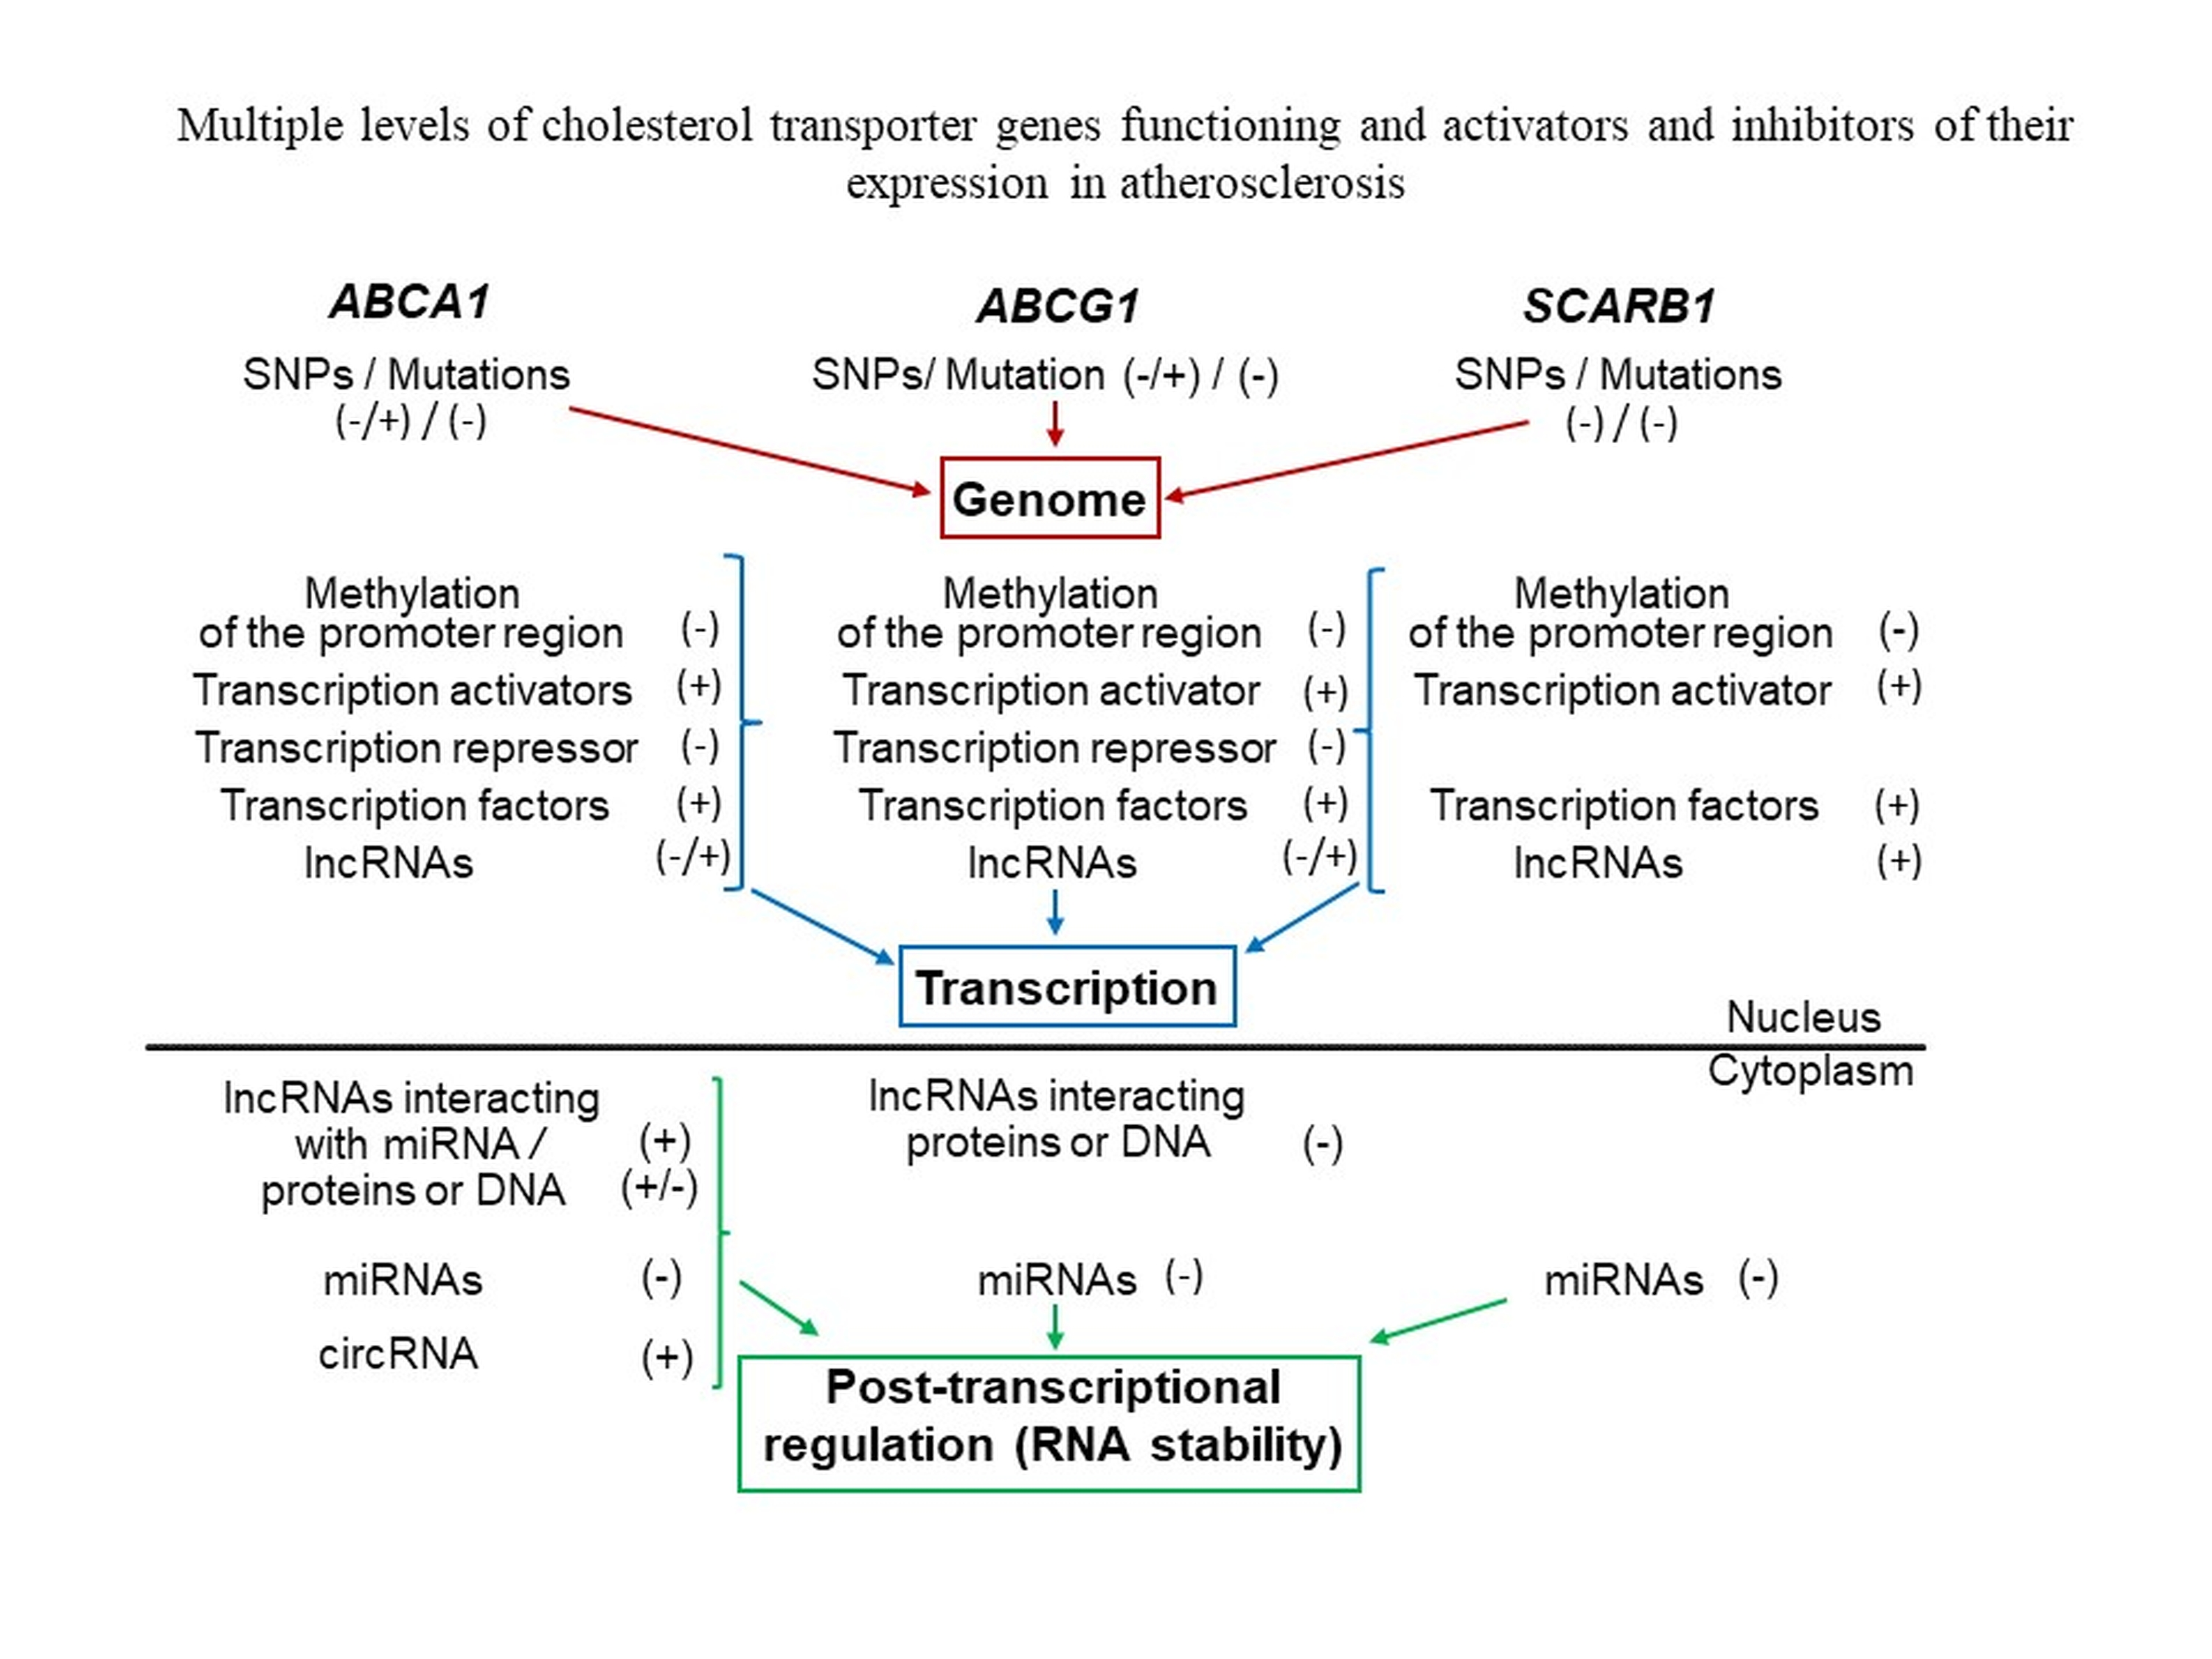 JCDD | Free Full-Text | Genomic Variants and Multilevel Regulation of  ABCA1, ABCG1, and SCARB1 Expression in Atherogenesis